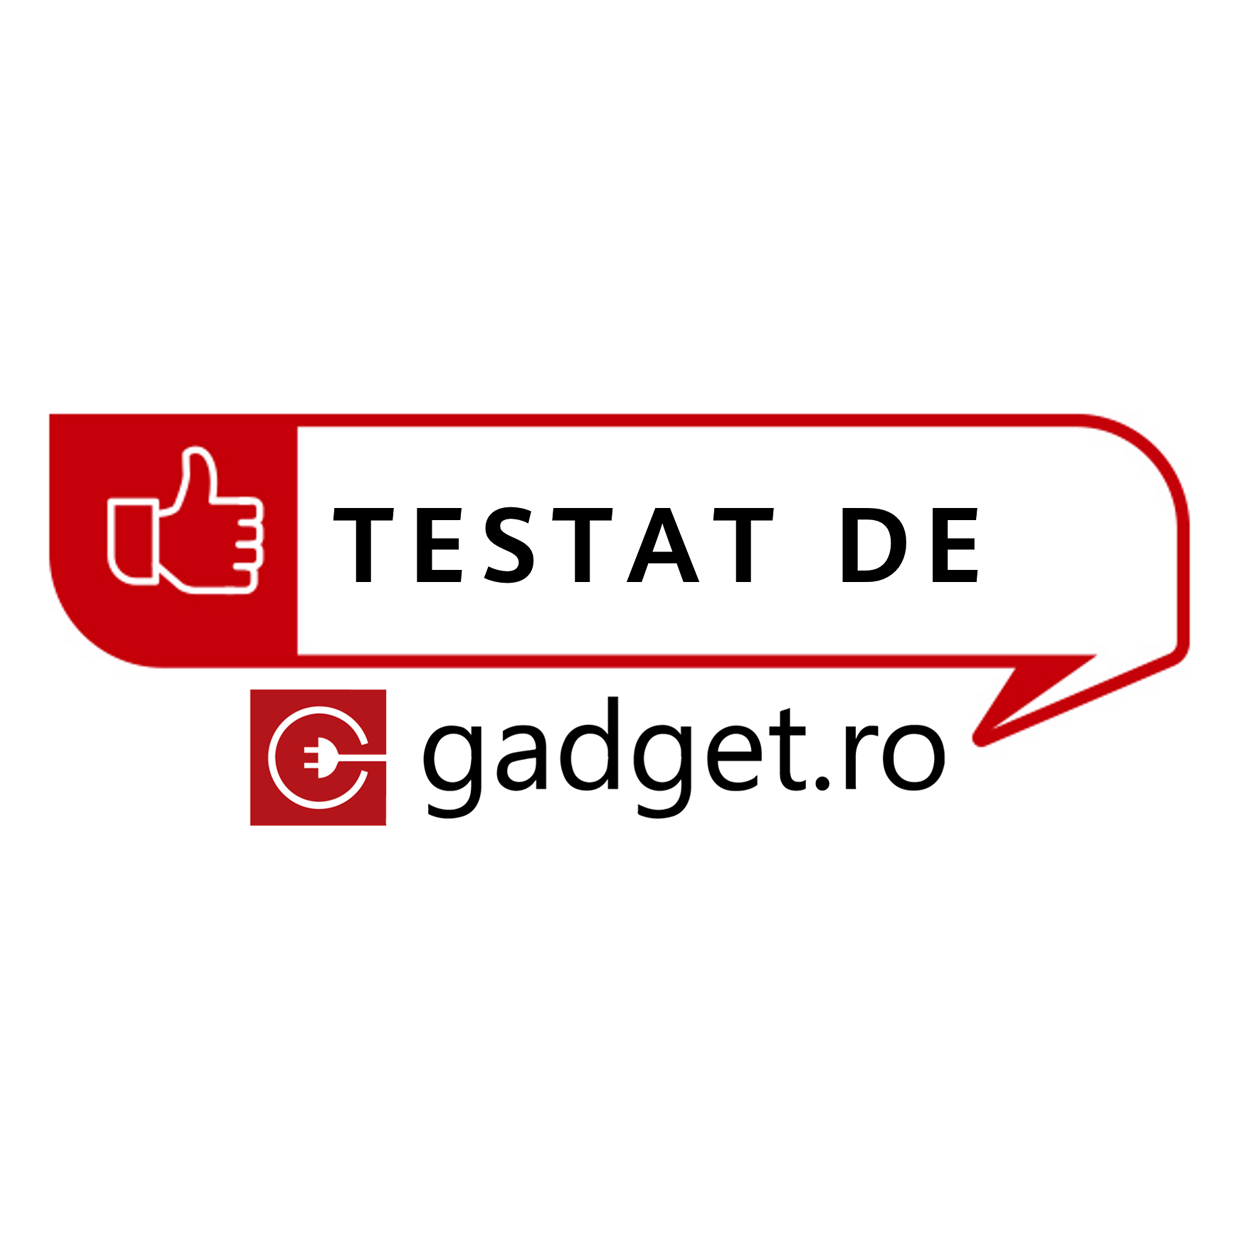 Tested by gadget.ro